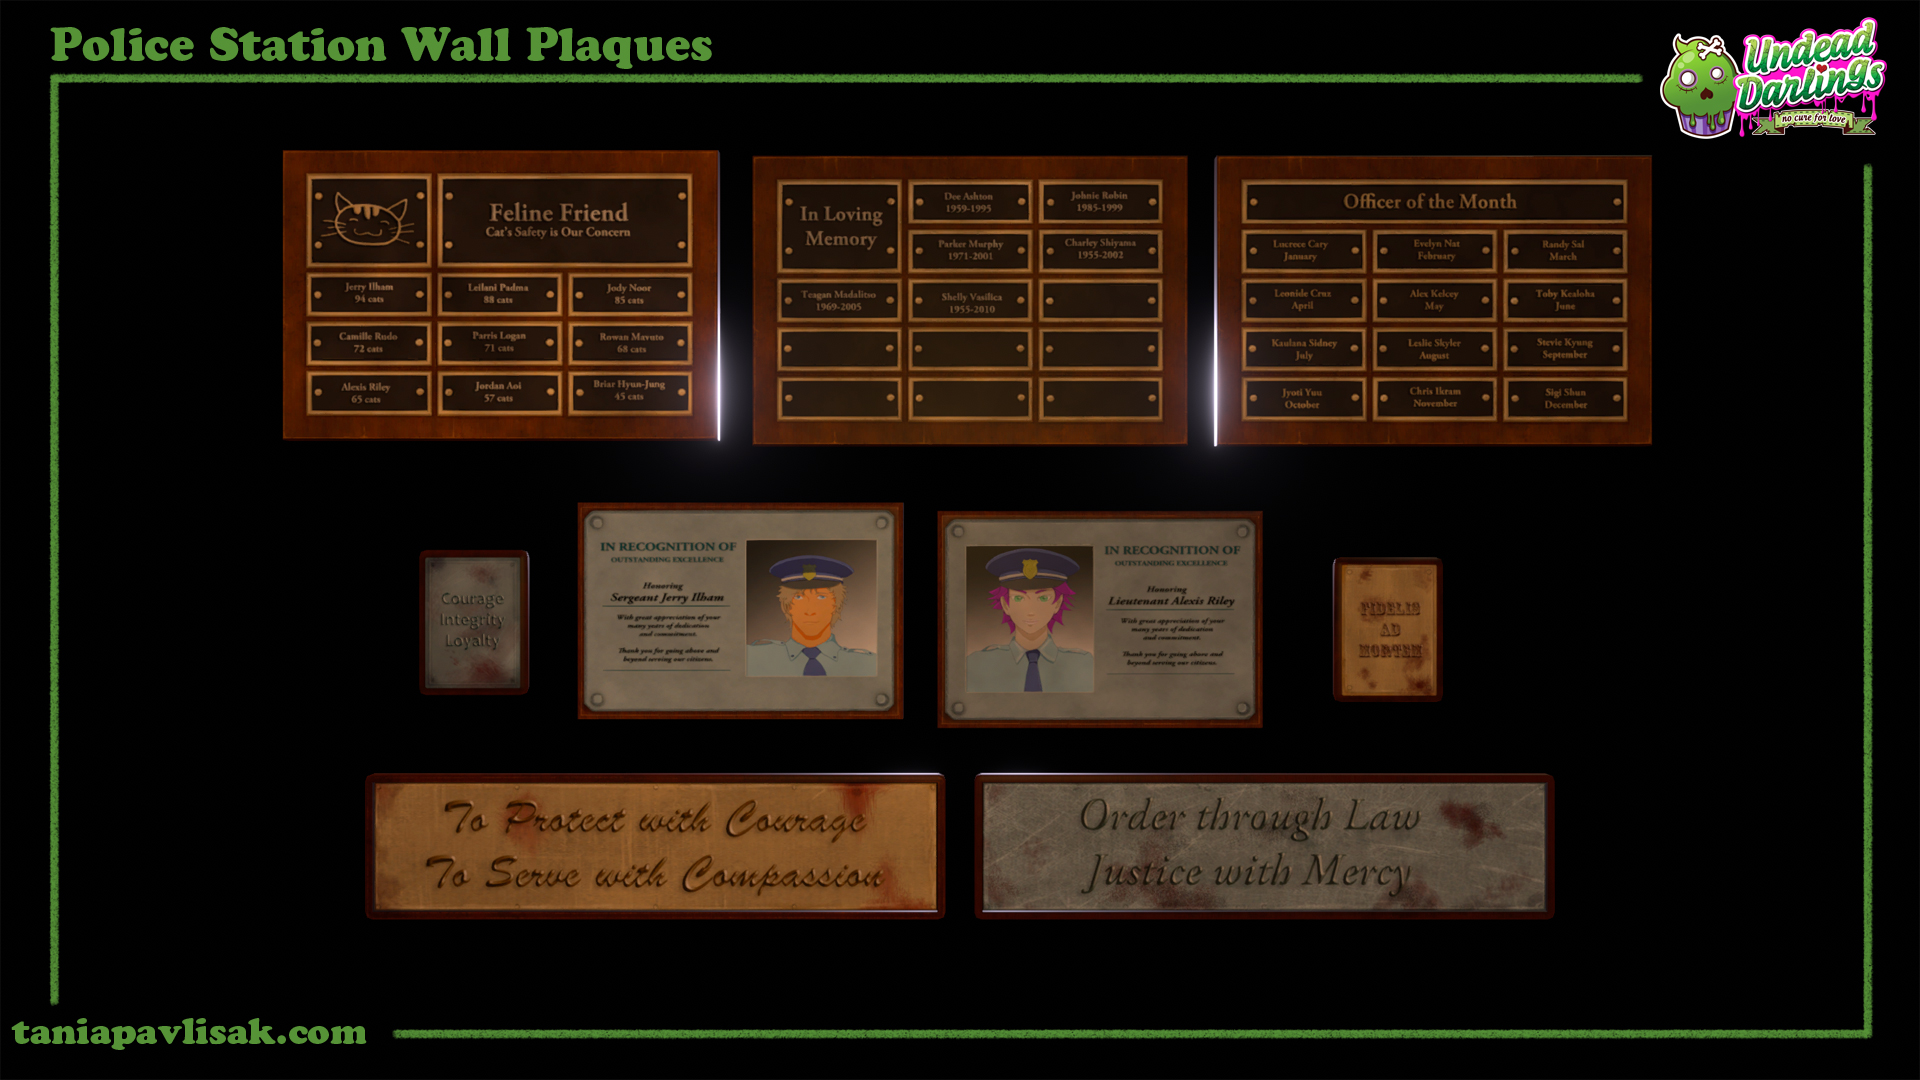 Achievements and Motivational Wall Plaques